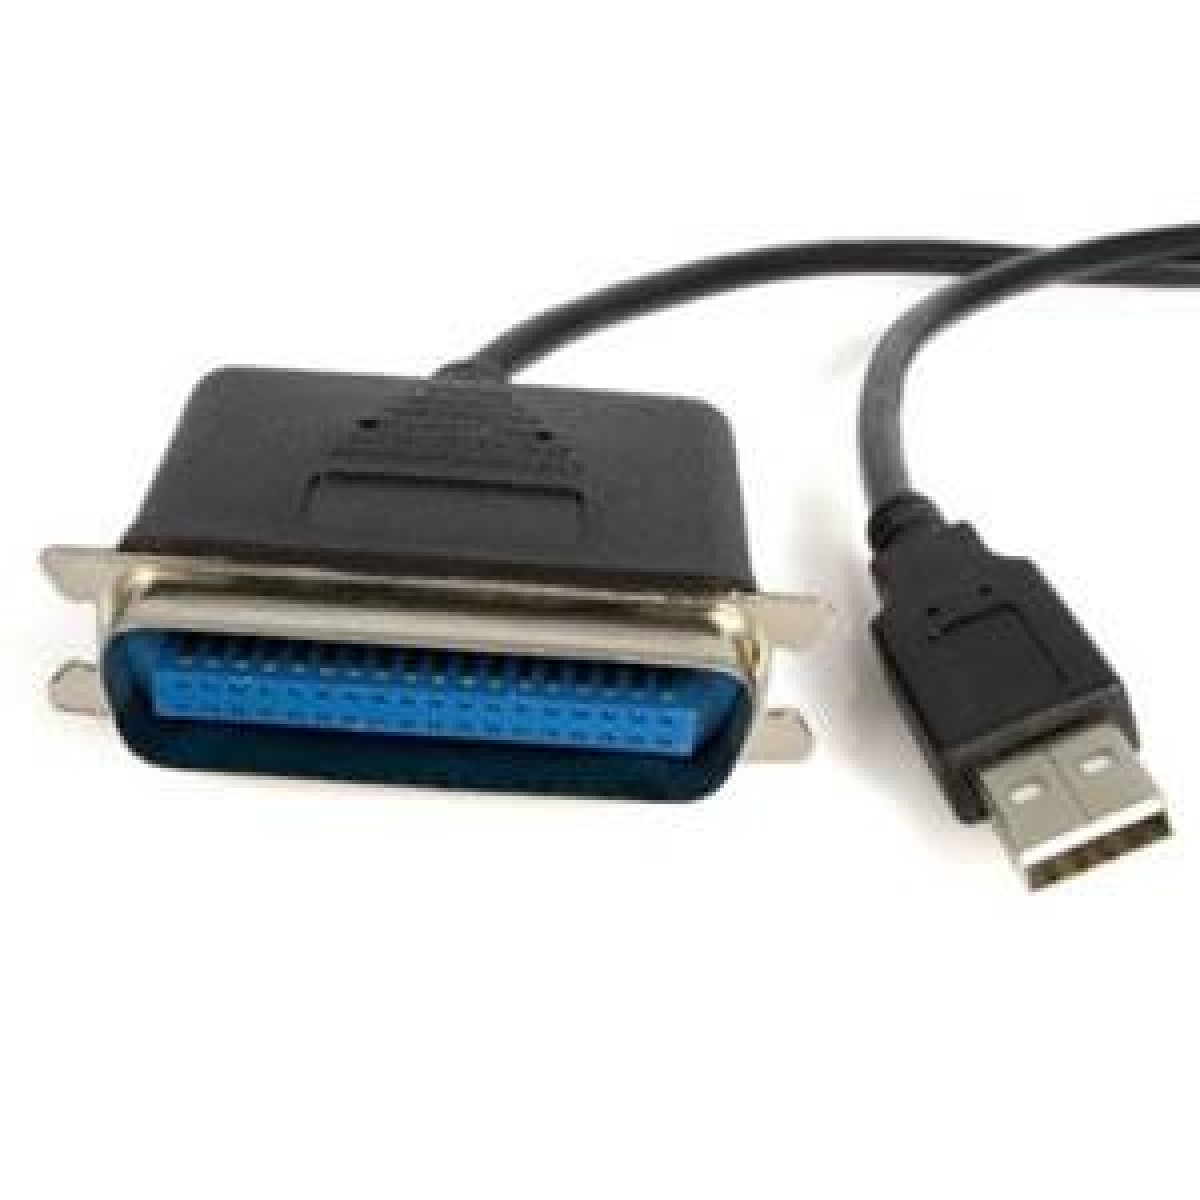 Topsync Usb To Cn36 Parallel Printer Adapter Cable Mm 5245